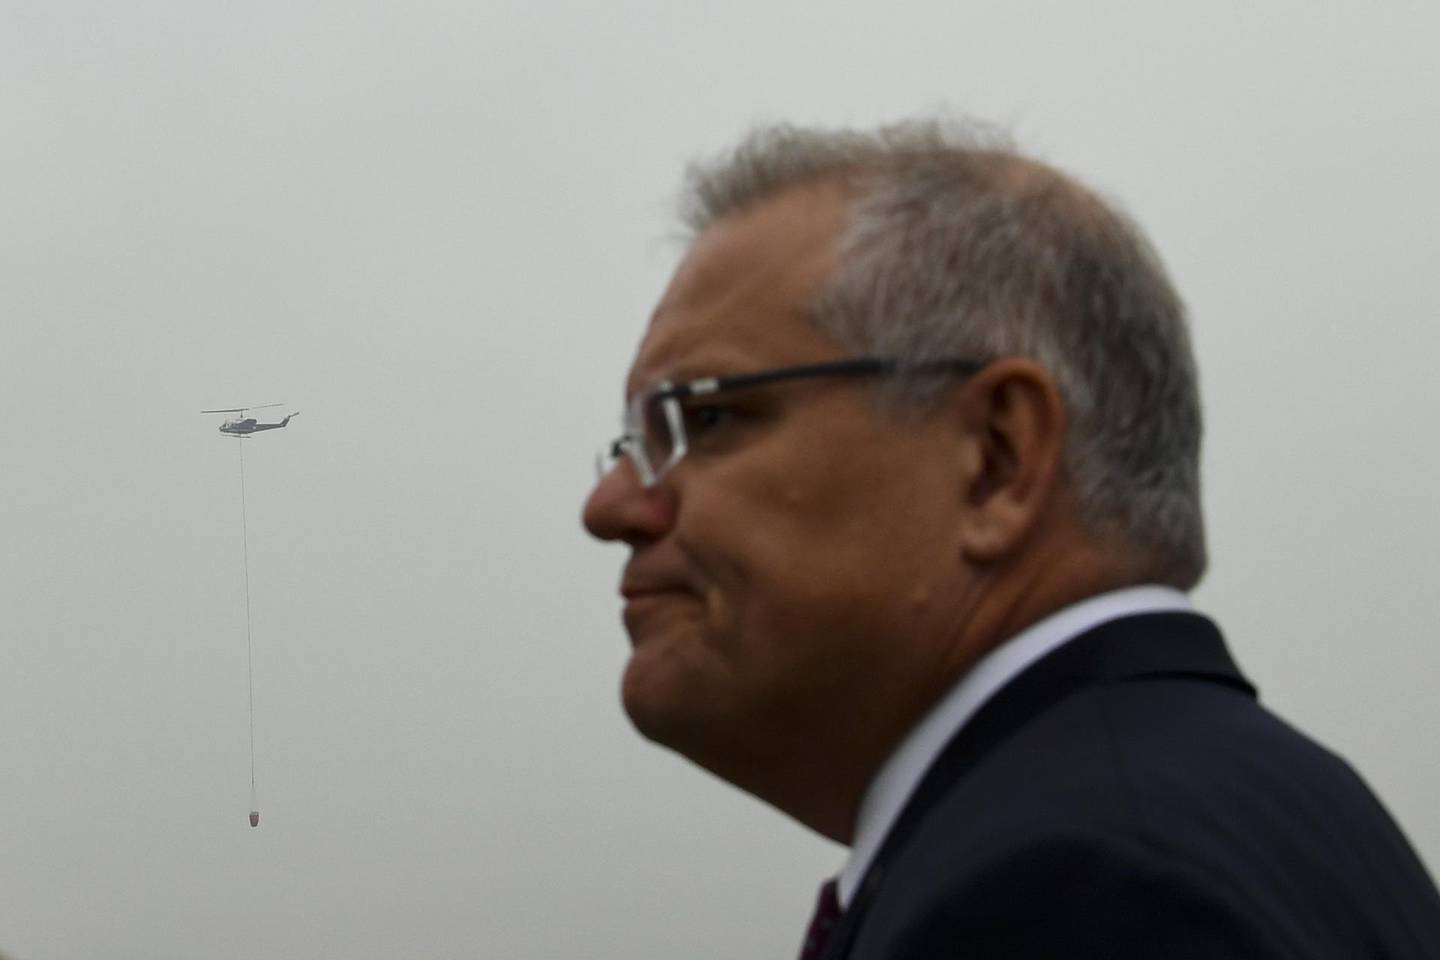 epa08103676 A fire fighting helicopter flies in the sky behind Australian Prime Minister Scott Morrison during a visit to HMAS Albatross in Nowra, New South Wales, Australia, 05 January 2020. According to media reports, at least 1,200 homes in Victoria and New South Wales have been destroyed by fires this season, at least 18 people have died, and more than 5.9 million hectares have been burnt.  EPA/LUKAS COCH / POOL AUSTRALIA AND NEW ZEALAND OUT